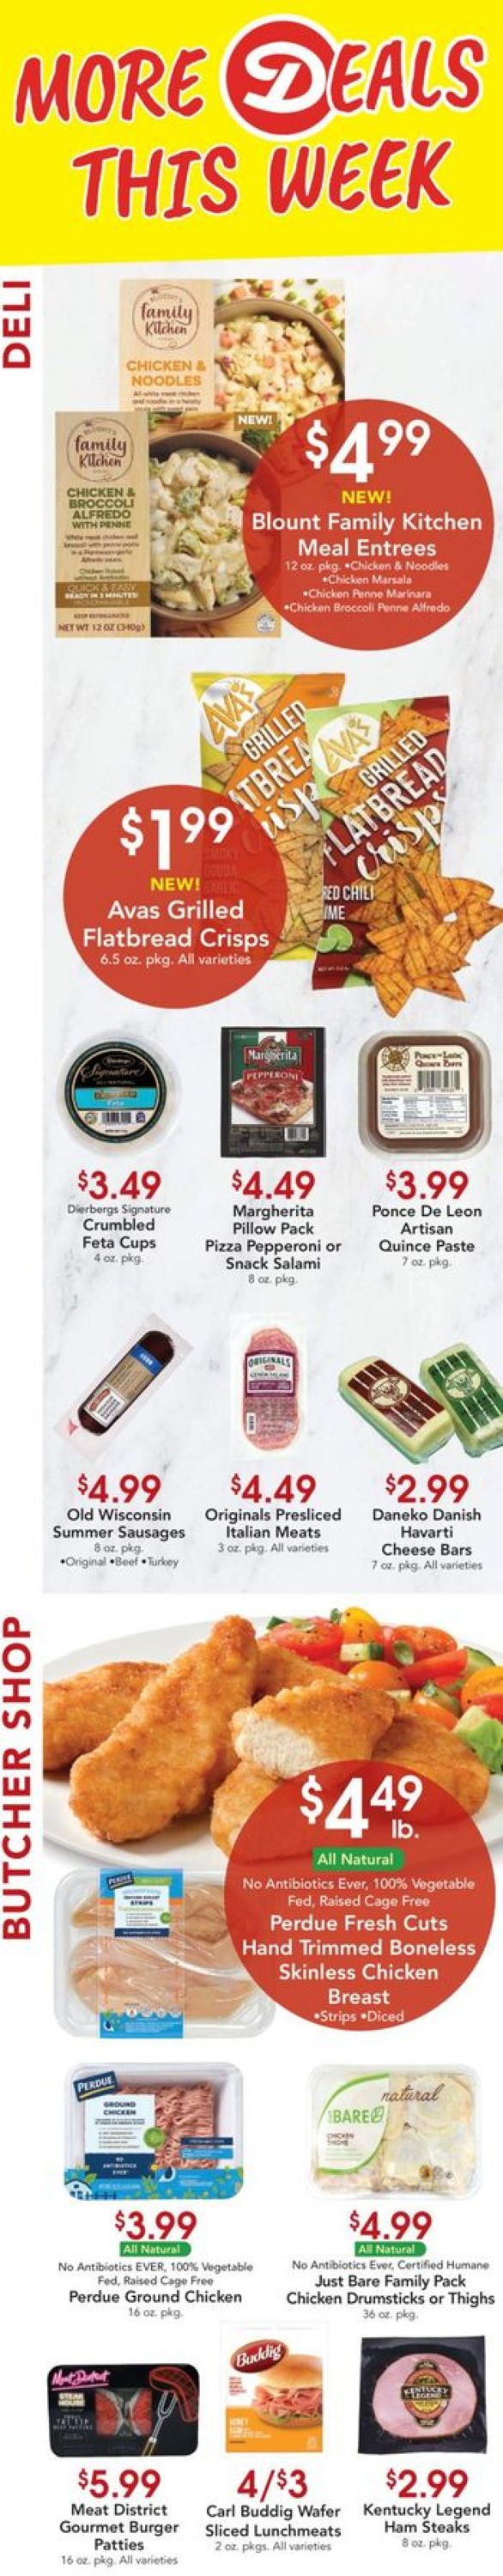 Catalogue Dierbergs from 03/02/2021